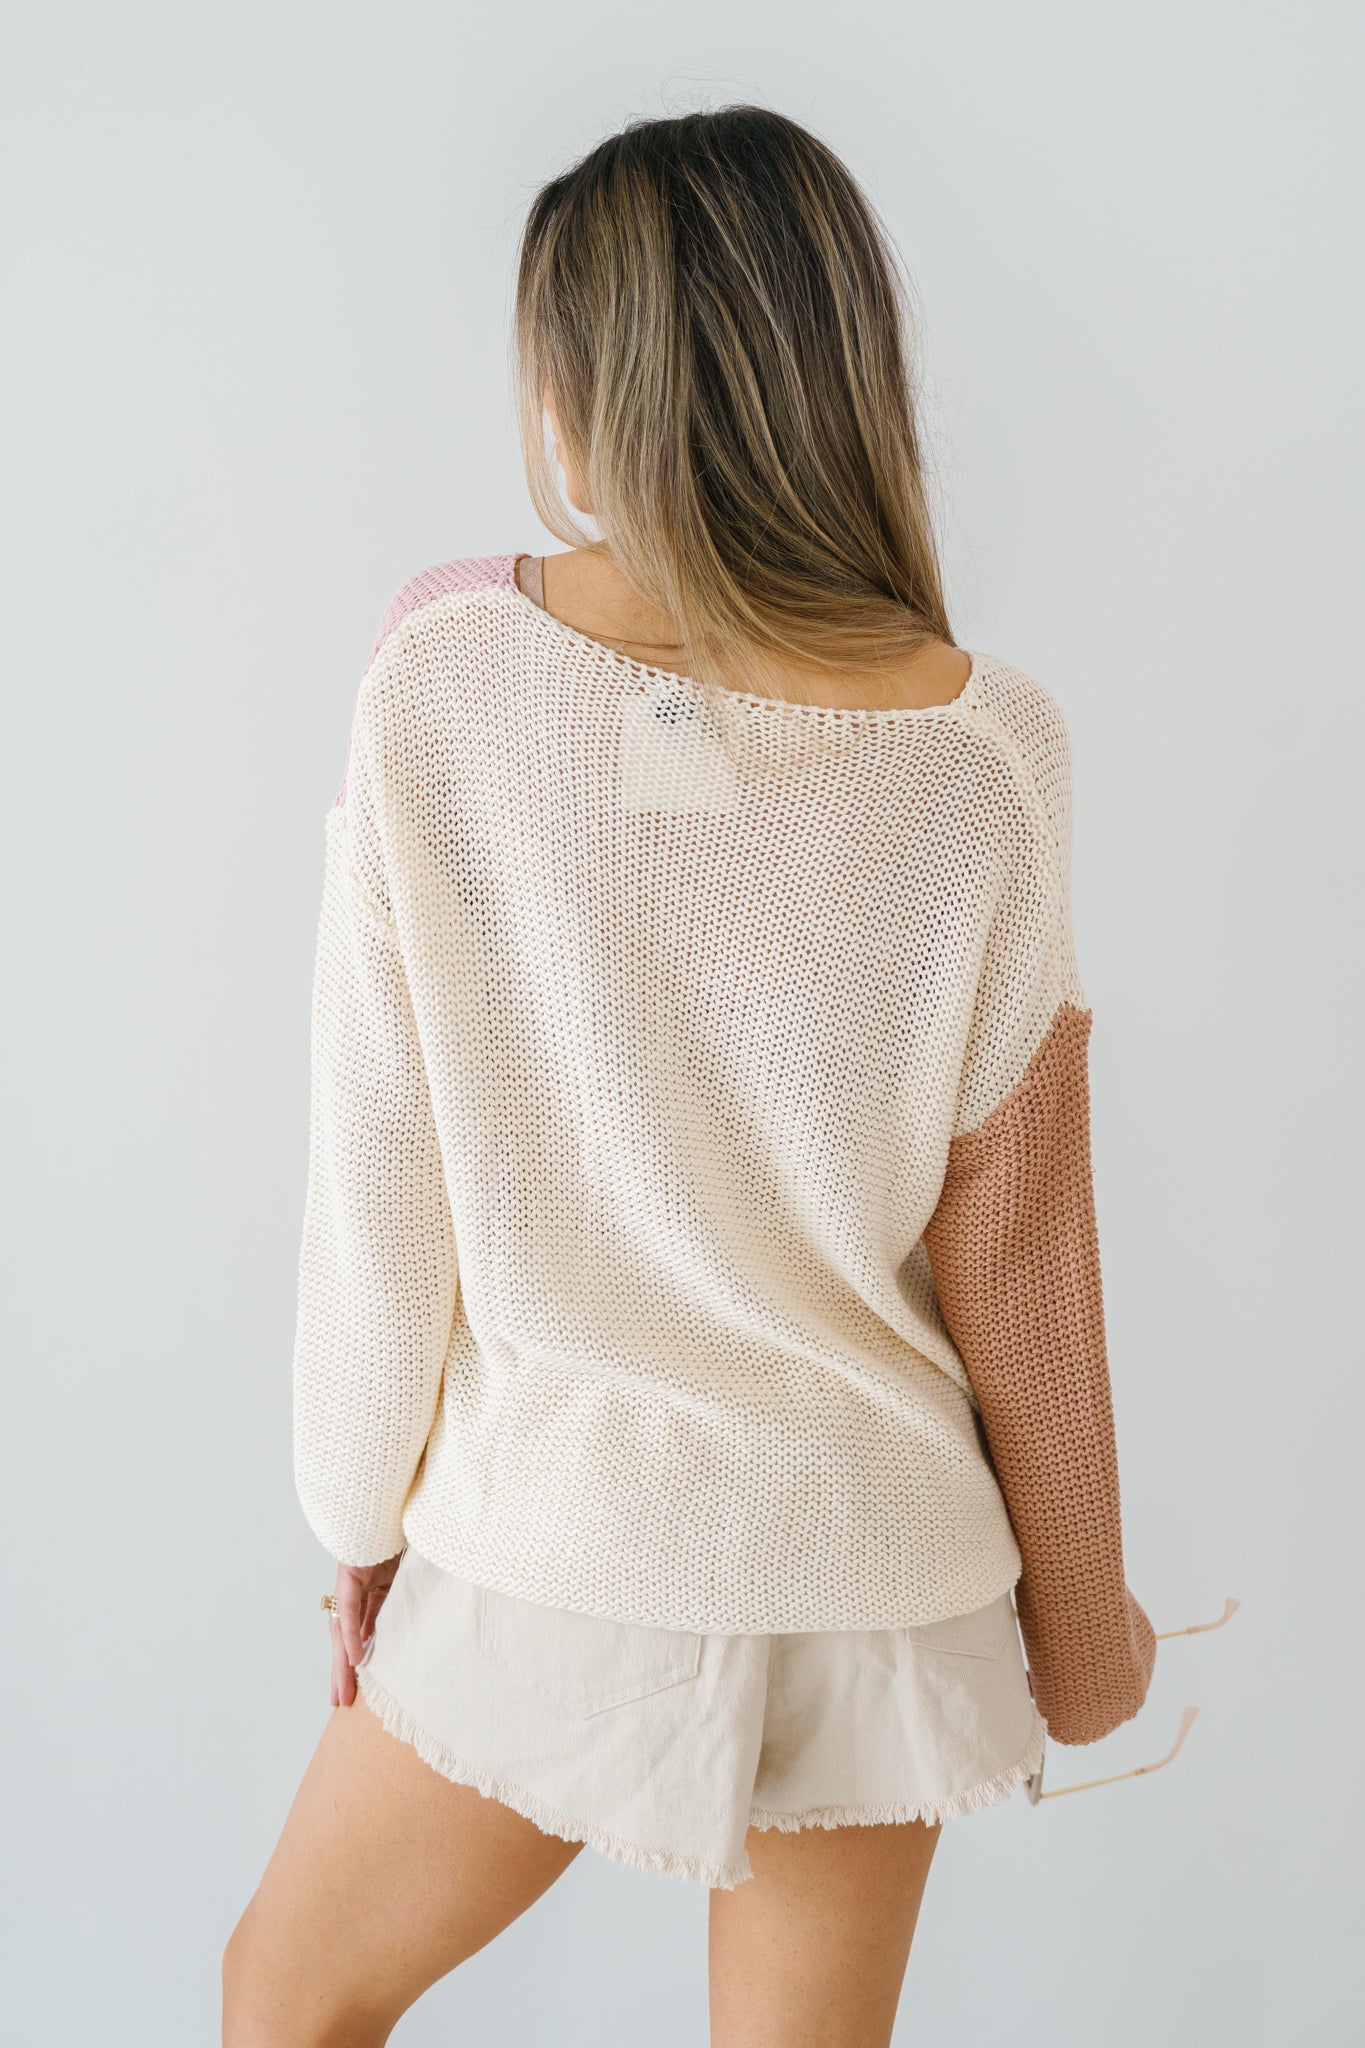 Sally Sweater Top With Pocket